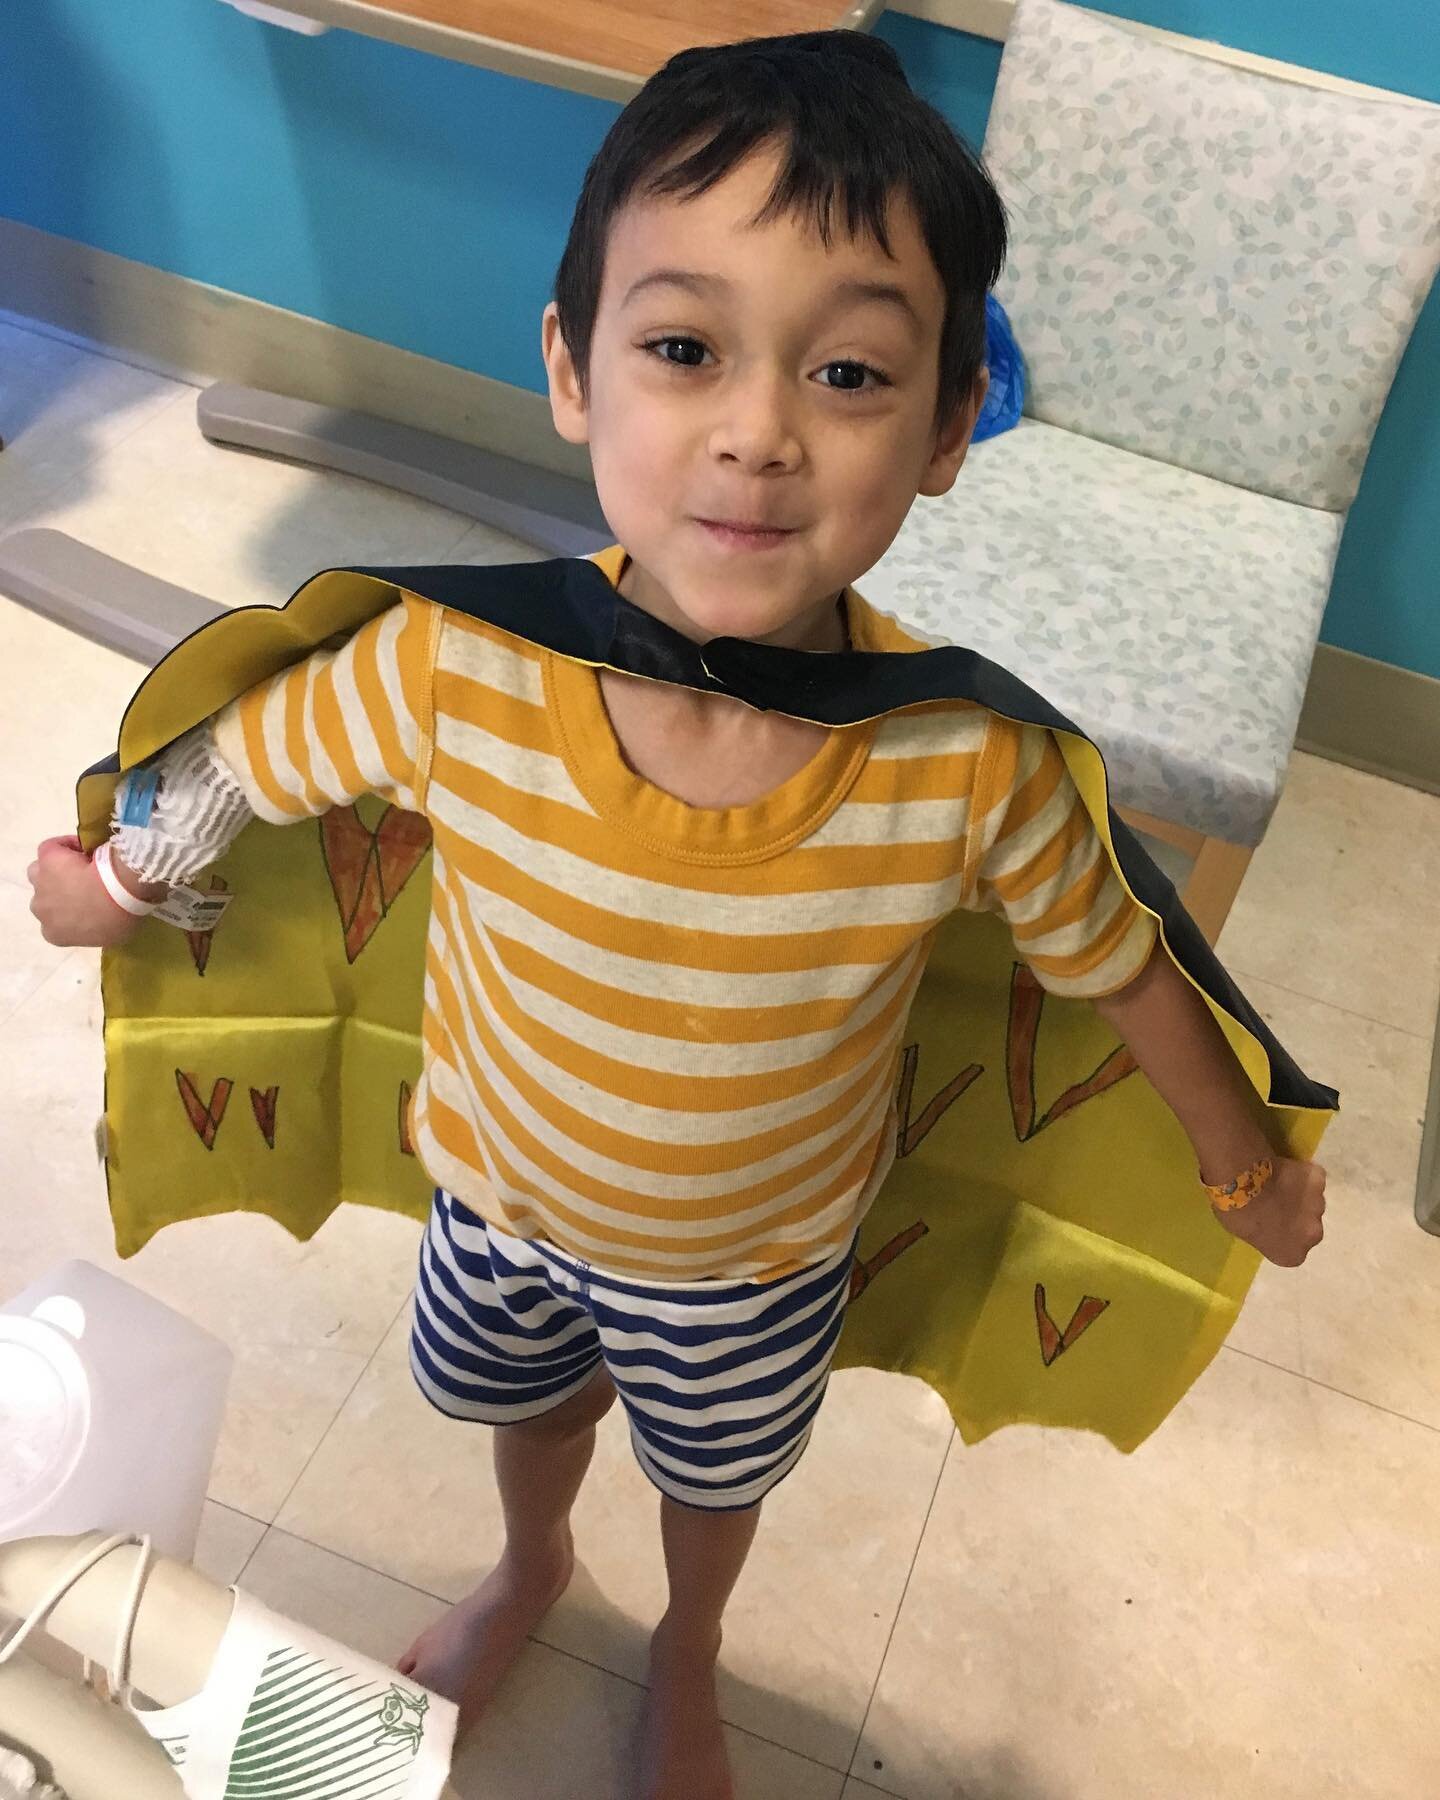 🦸&zwj;♂️ Meet our superhero, Ray. He needs our help finding a match. Ray was diagnosed with an extremely rare genetic mutation called XLP2. If he can find a matching donor, his disease can be 100% cured.

We need all the help we can get to find a ma